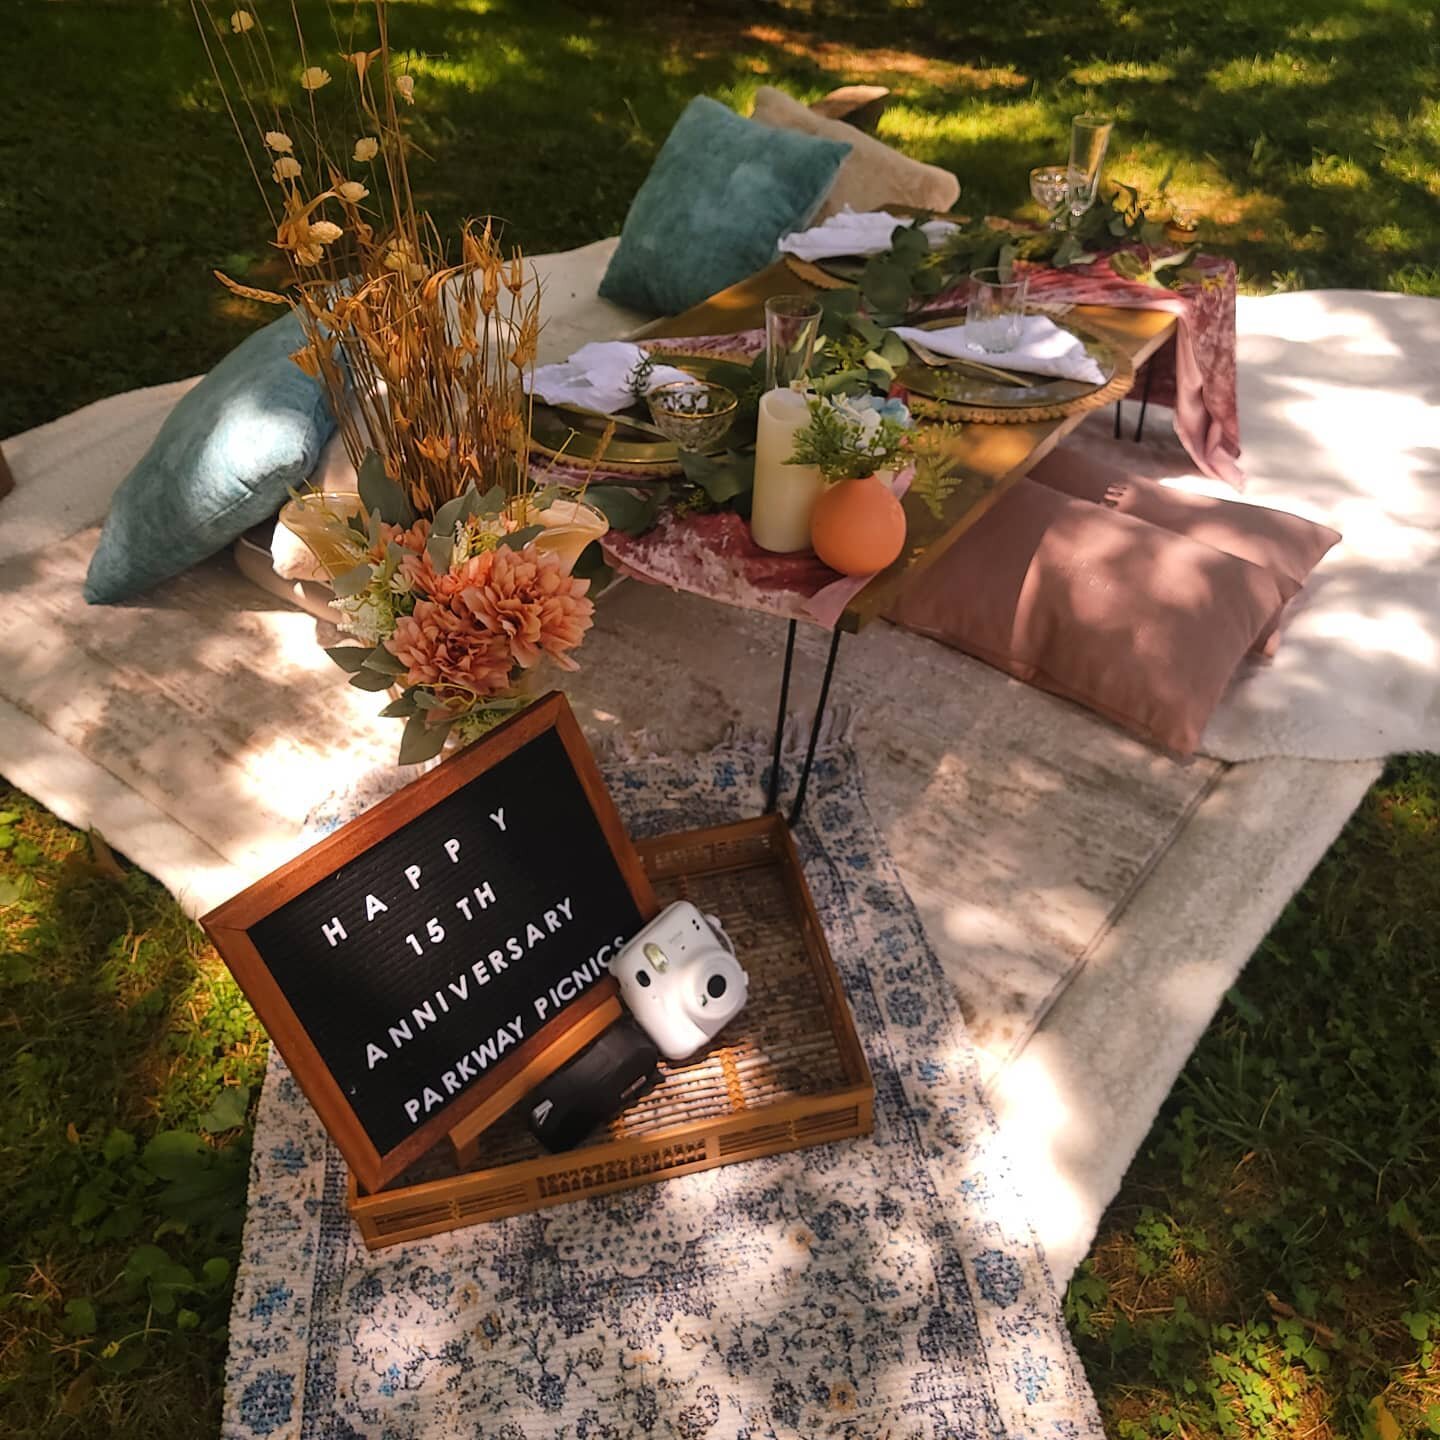 15th Anniversary Picnic 🥰

Despite the weather playing with my emotions this picnic is ready to go! 
They decided to incorporate their 6 year old son who got his own little setup + adding on a Polaroid Camera. This picnic is unique as they decided t